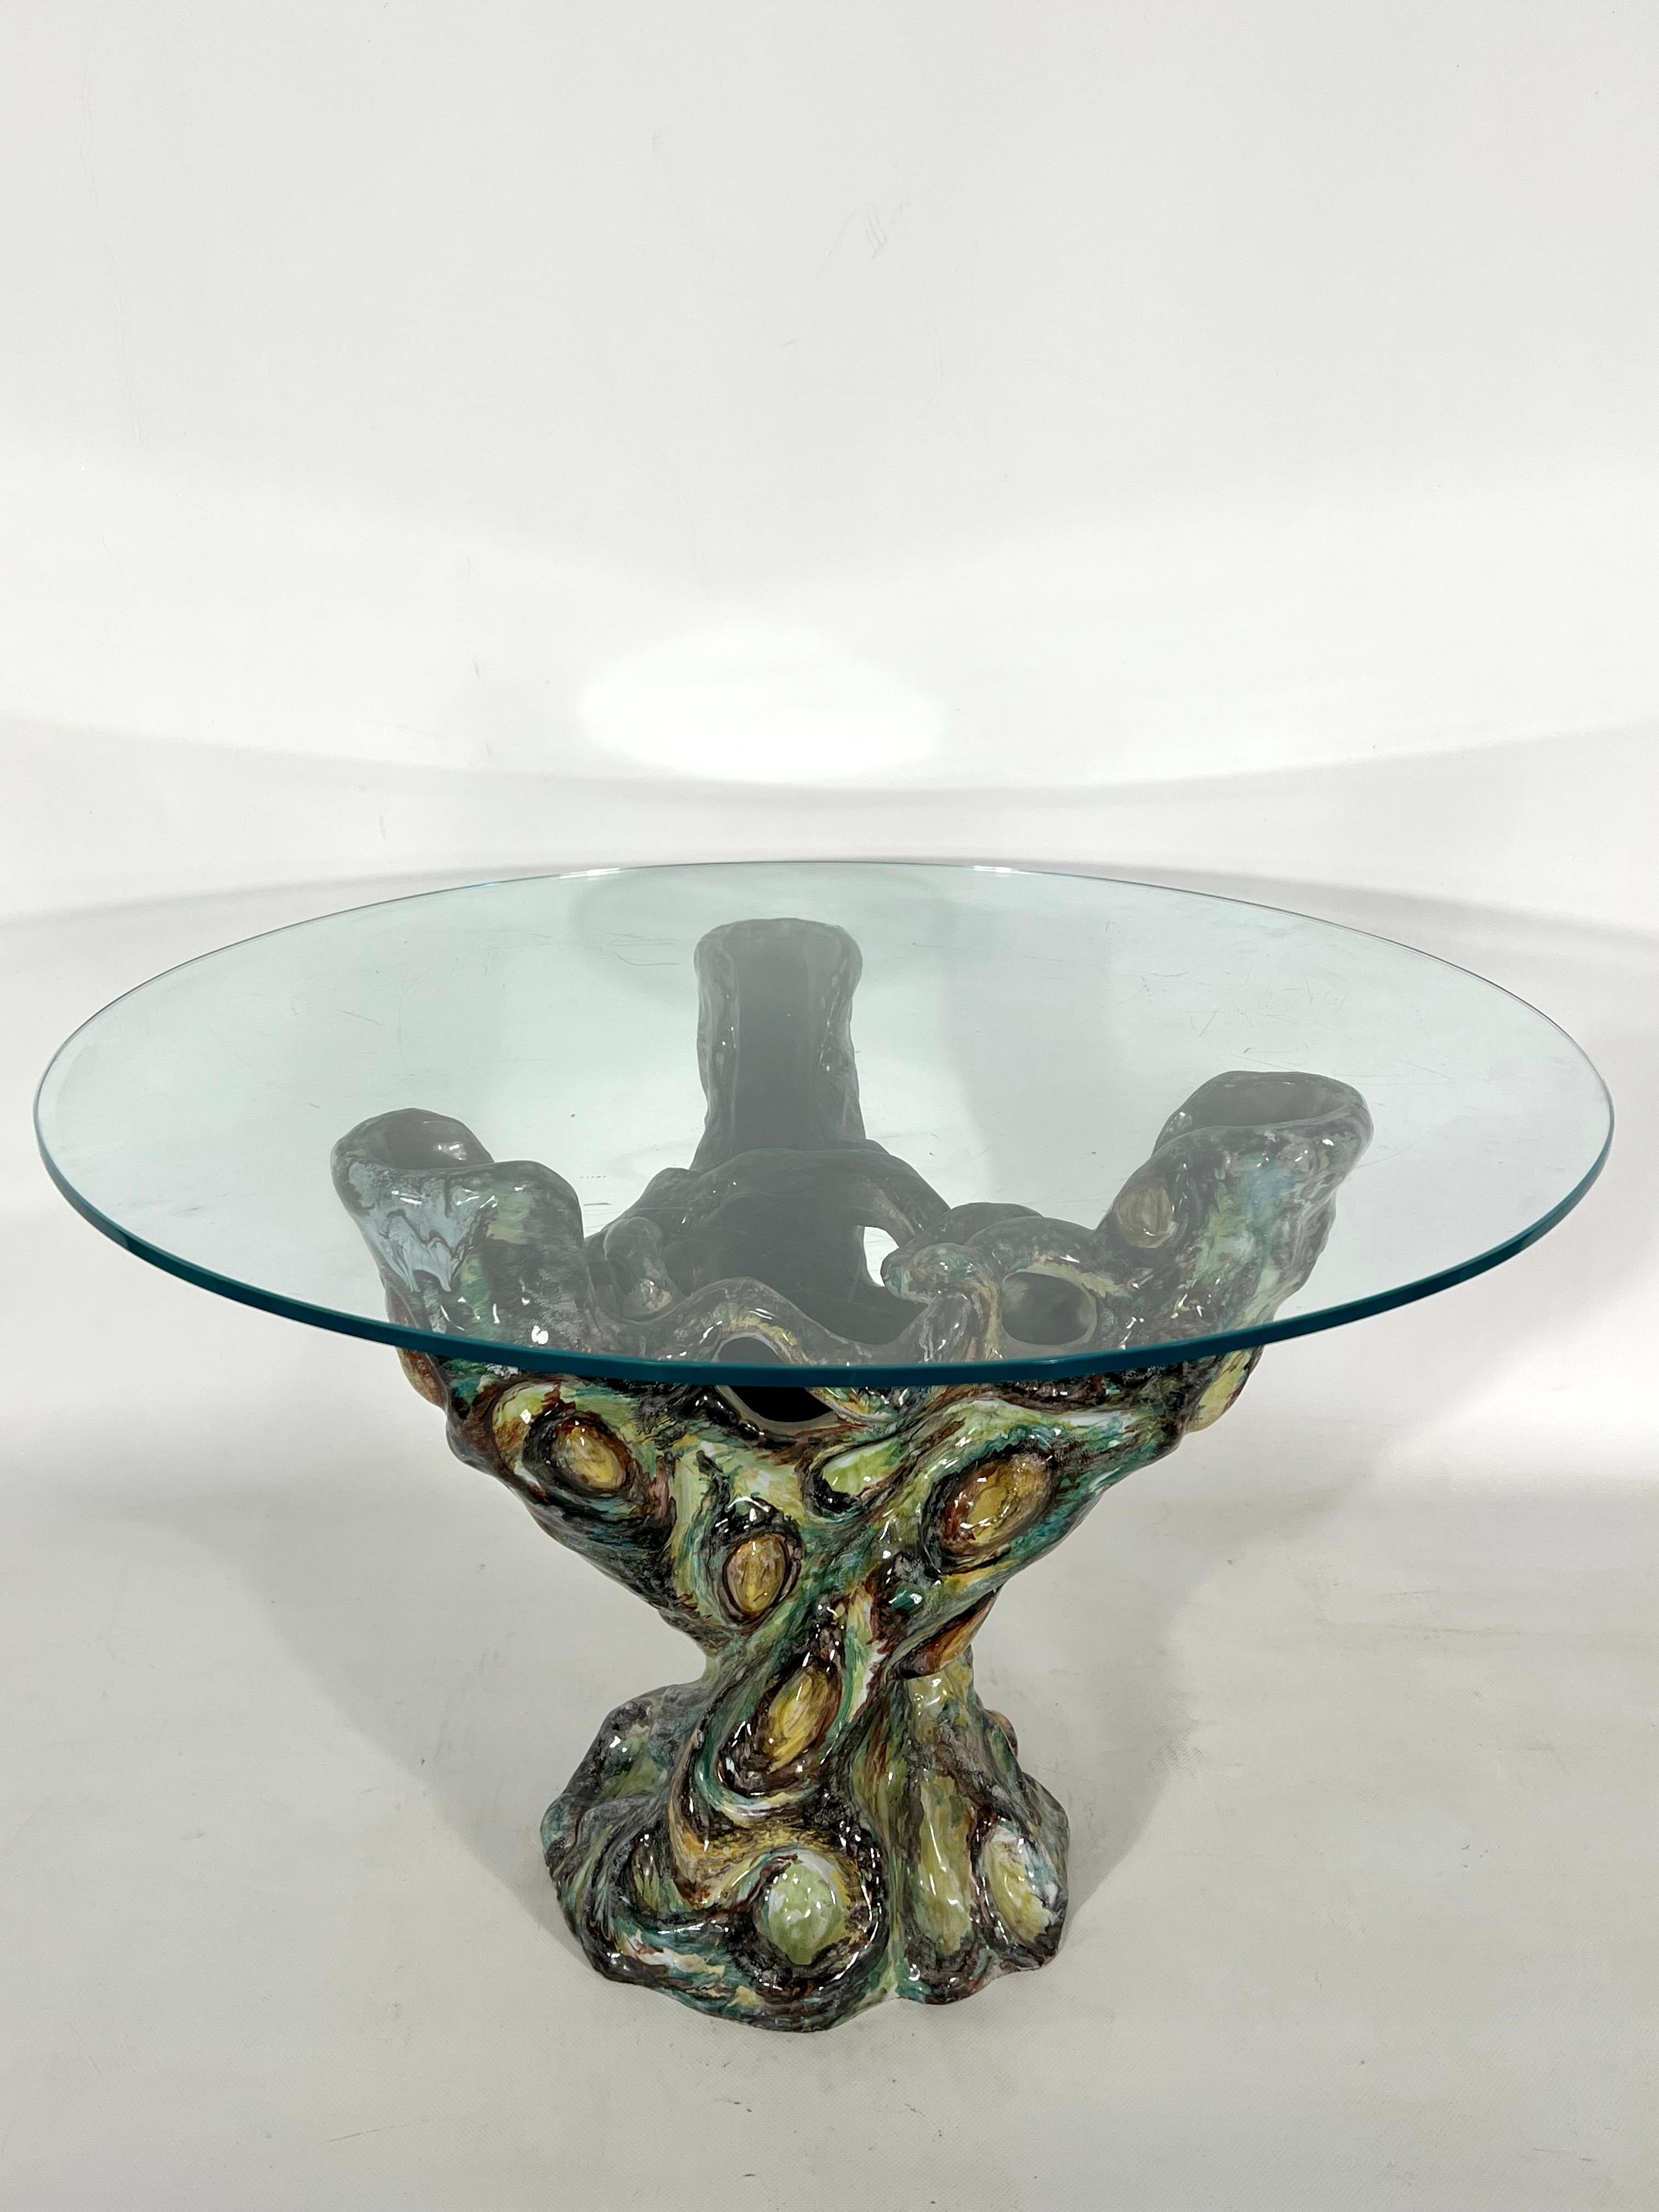 Vintage Sculptural Modern Ceramic Coffee Table, Italy, 1950s For Sale 3